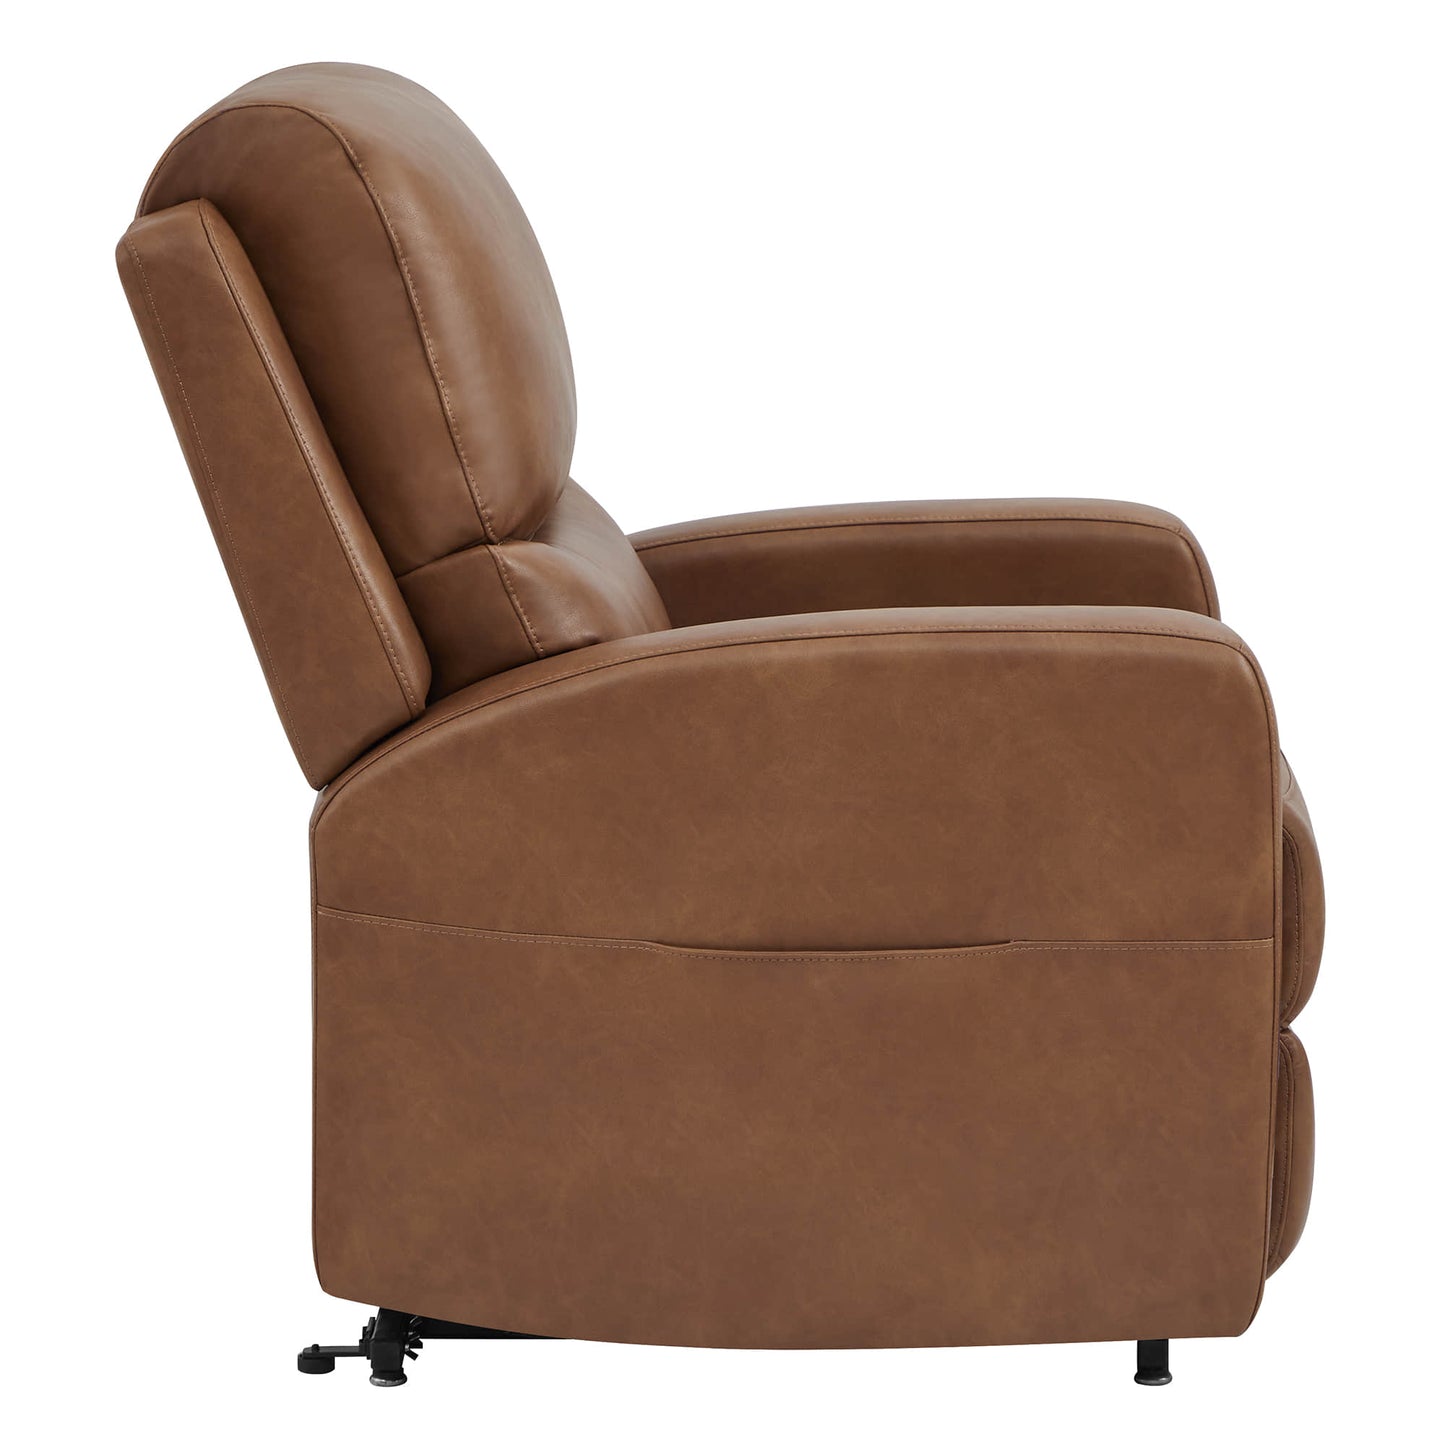 CHITA LIVING-Finley Power Lift Chair Recliner For Elderly-Lift Chair-Faux Leather-Saddle Brown-